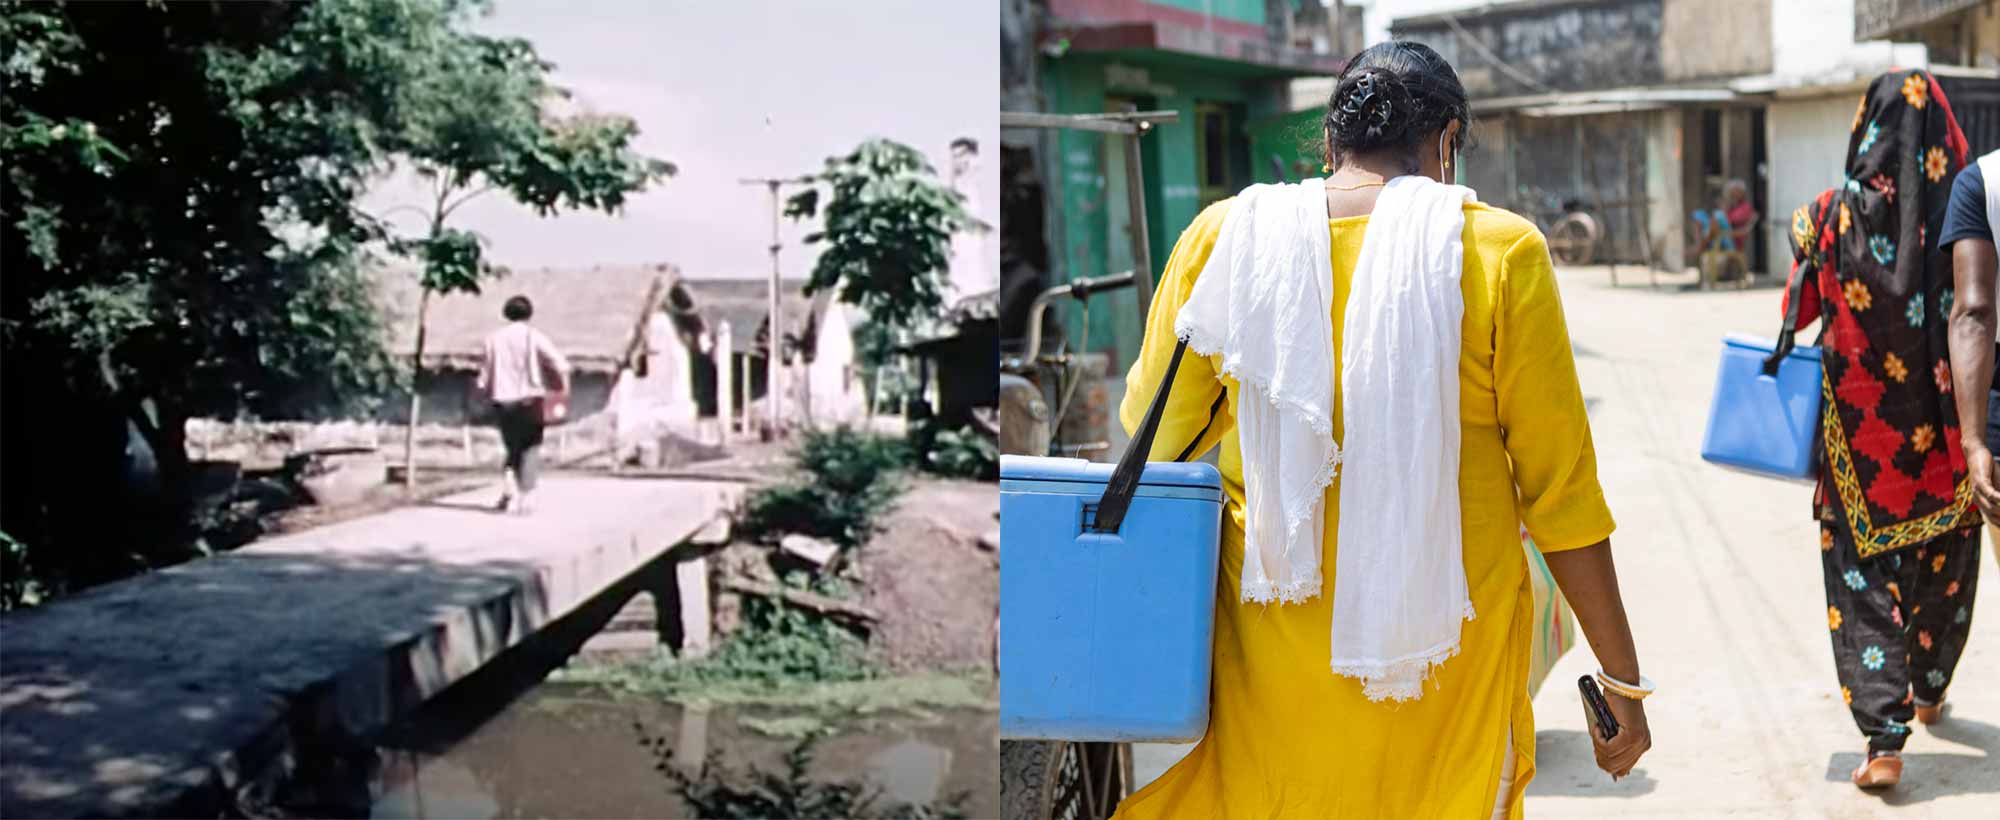 Rural health care. Left - a barefoot doctor in a cotton farming commune, eastern PRC, 1975 (still from a documentary [link] by Diana Li). Right - Nurses deliver COVID-19 vaccines in the Sundarbans, India, 2021"